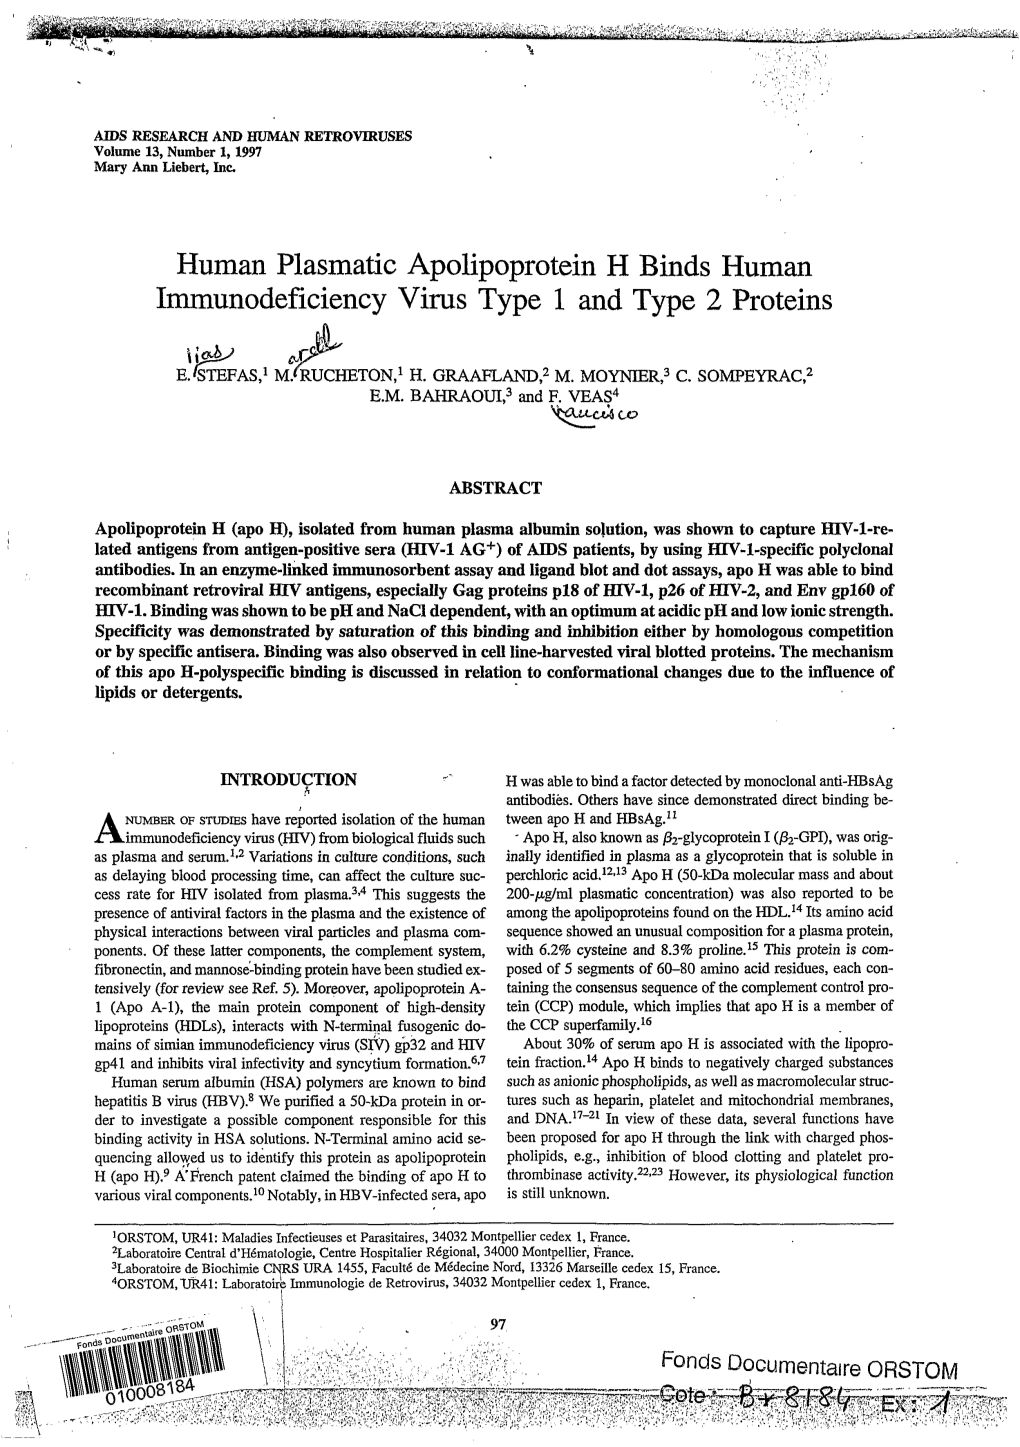 Human Plasmatic Apolipoprotein H Binds Human Immunodeficiency Virus Type 1 and Type 2 Proteins